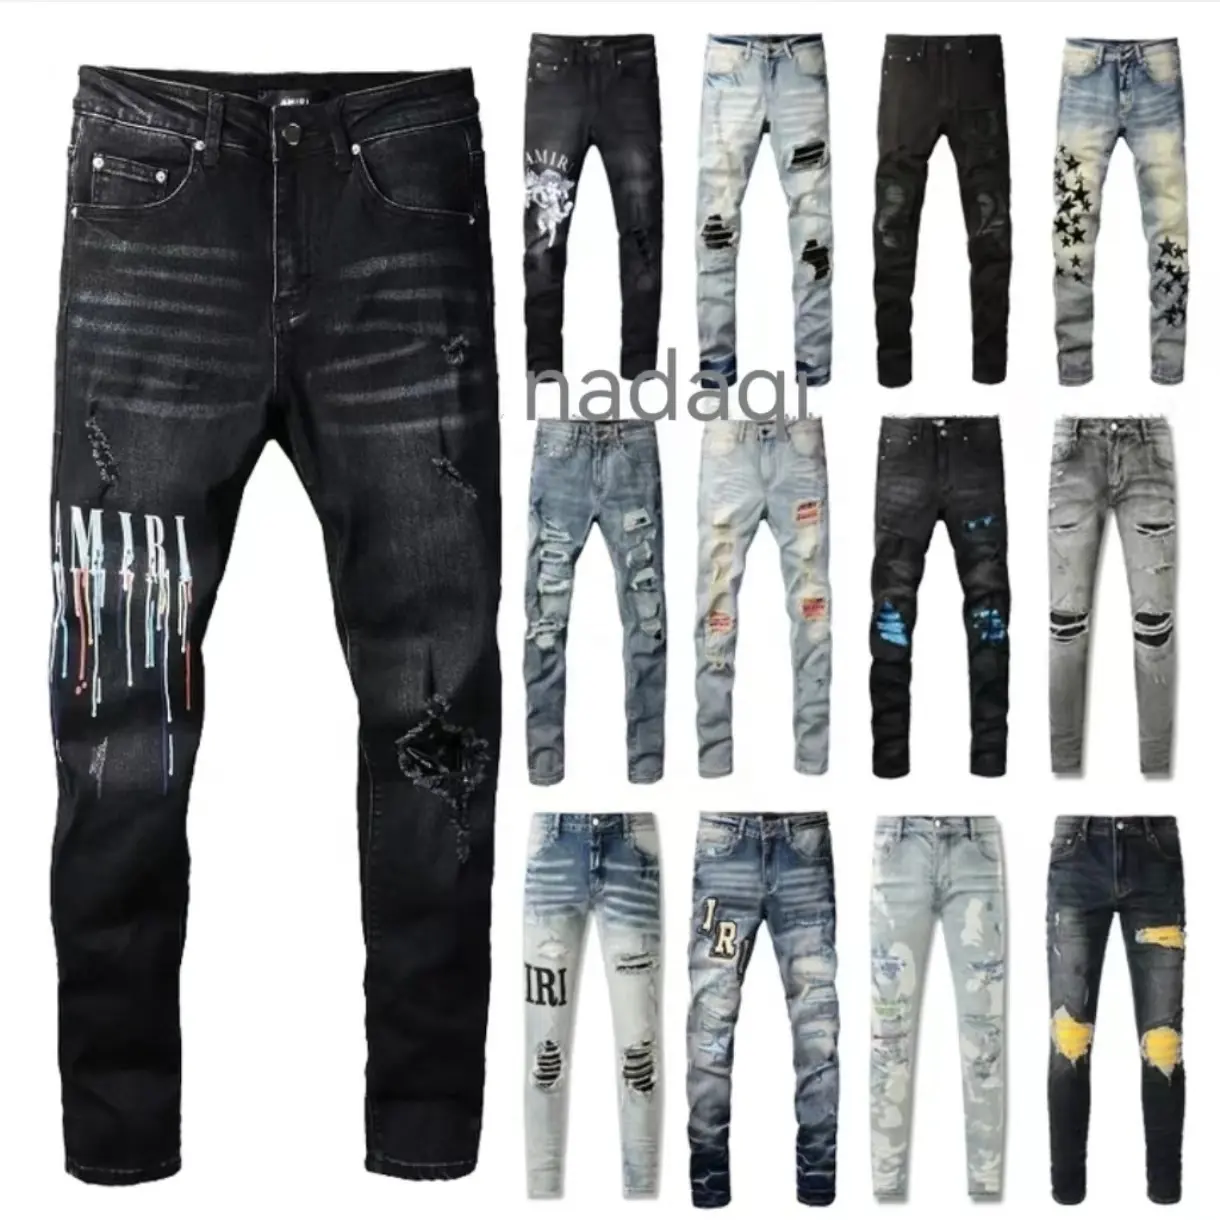 Amiry Jeans High Quality Streetwear Hiphop Well-worn Faded Vintage Distressed Ripped Patch Denim Baggy Designer Men Amiry Jeans